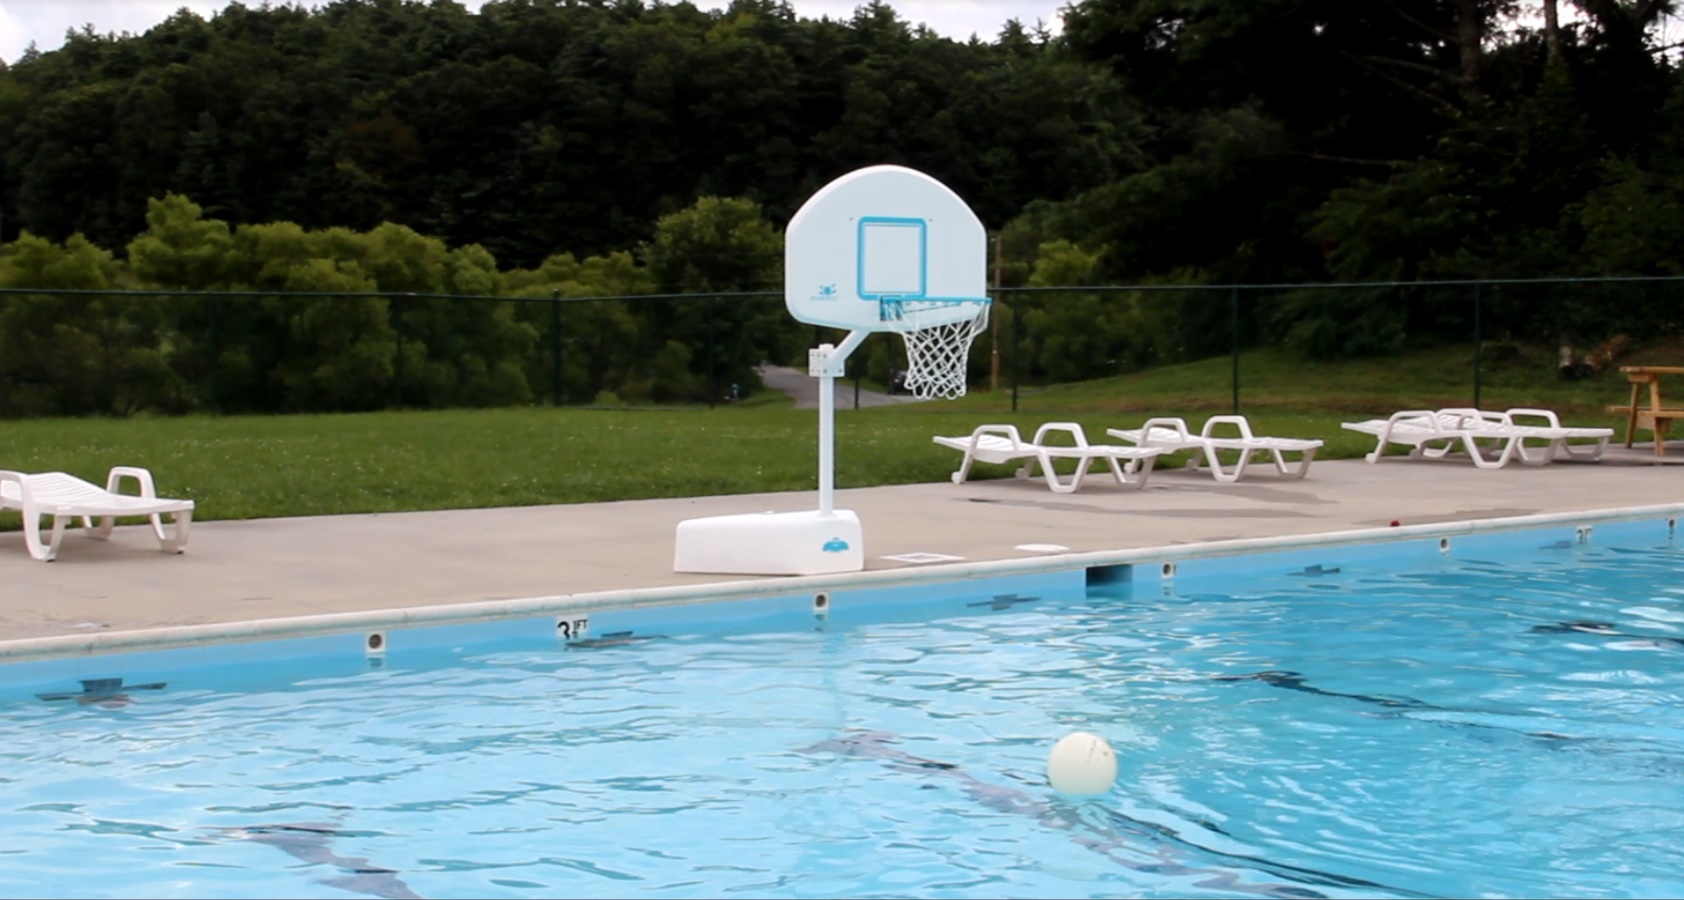 WYTHE COUNTY ANNOUNCES FREE POOL DAY IN HONOR OF FIRE & RESCUE RESPONDERS